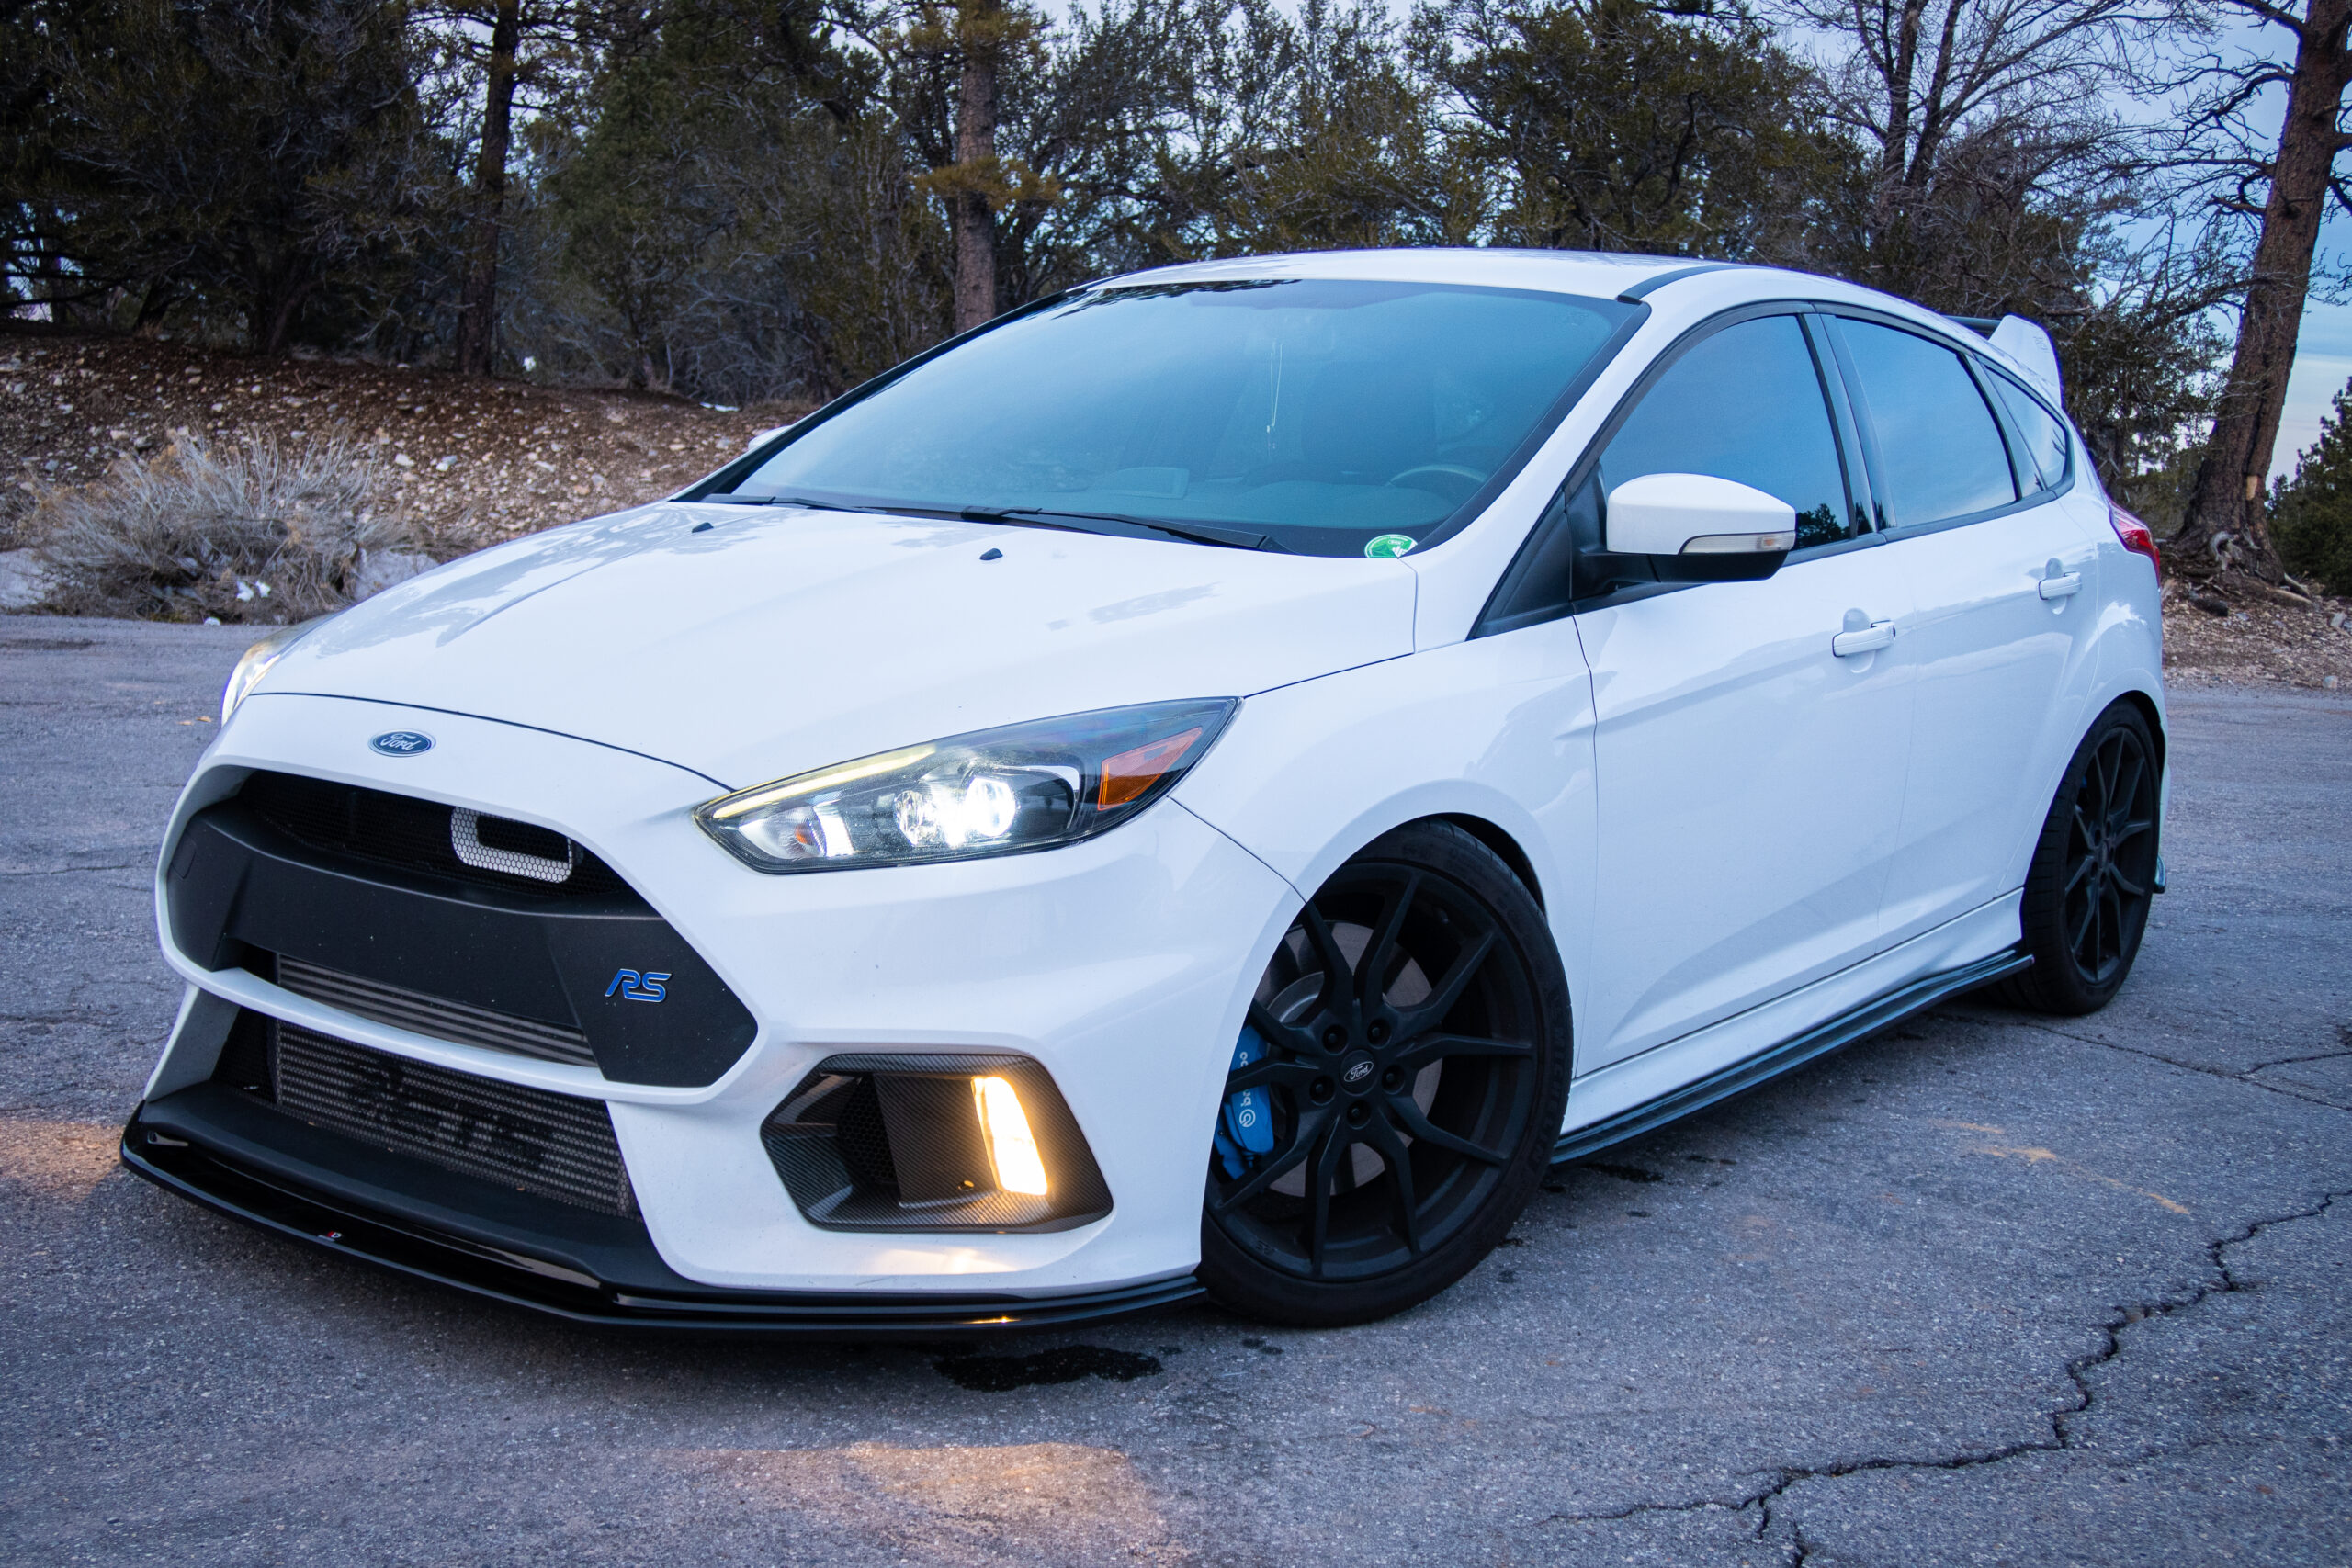 Bargain Bin Review: The Ford Focus RS is Still Worthy of your